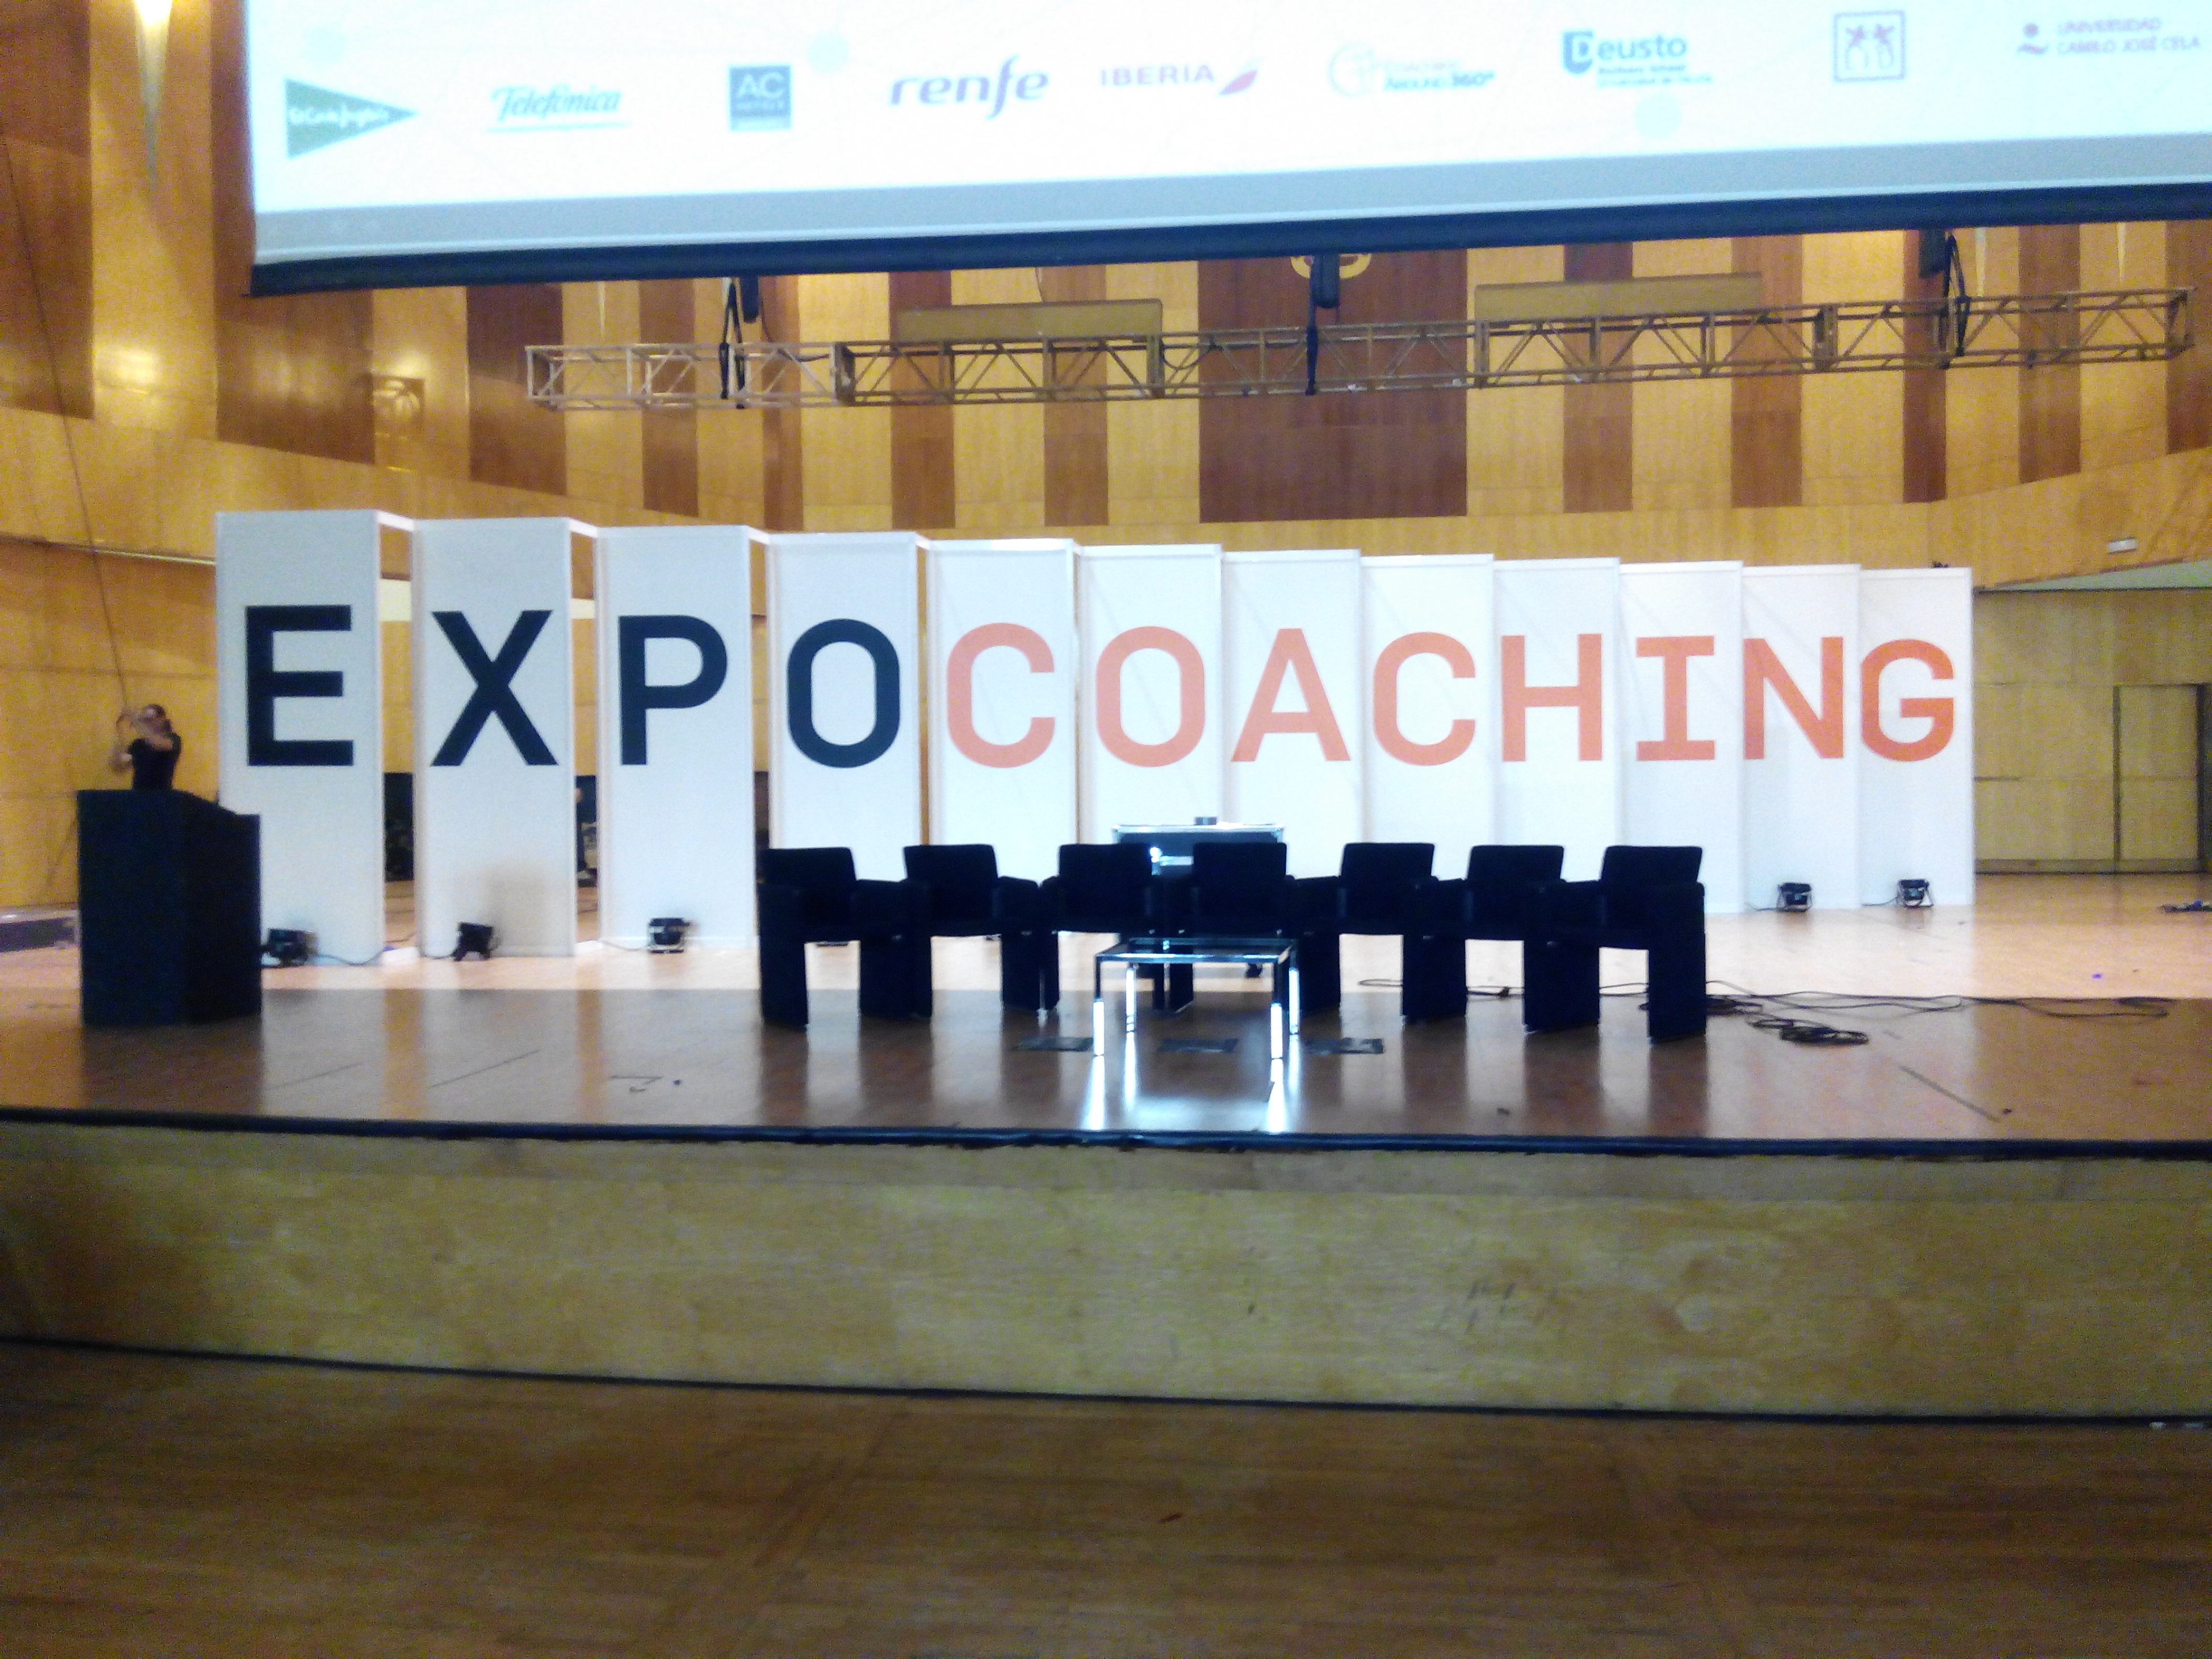 Expocoaching 2015